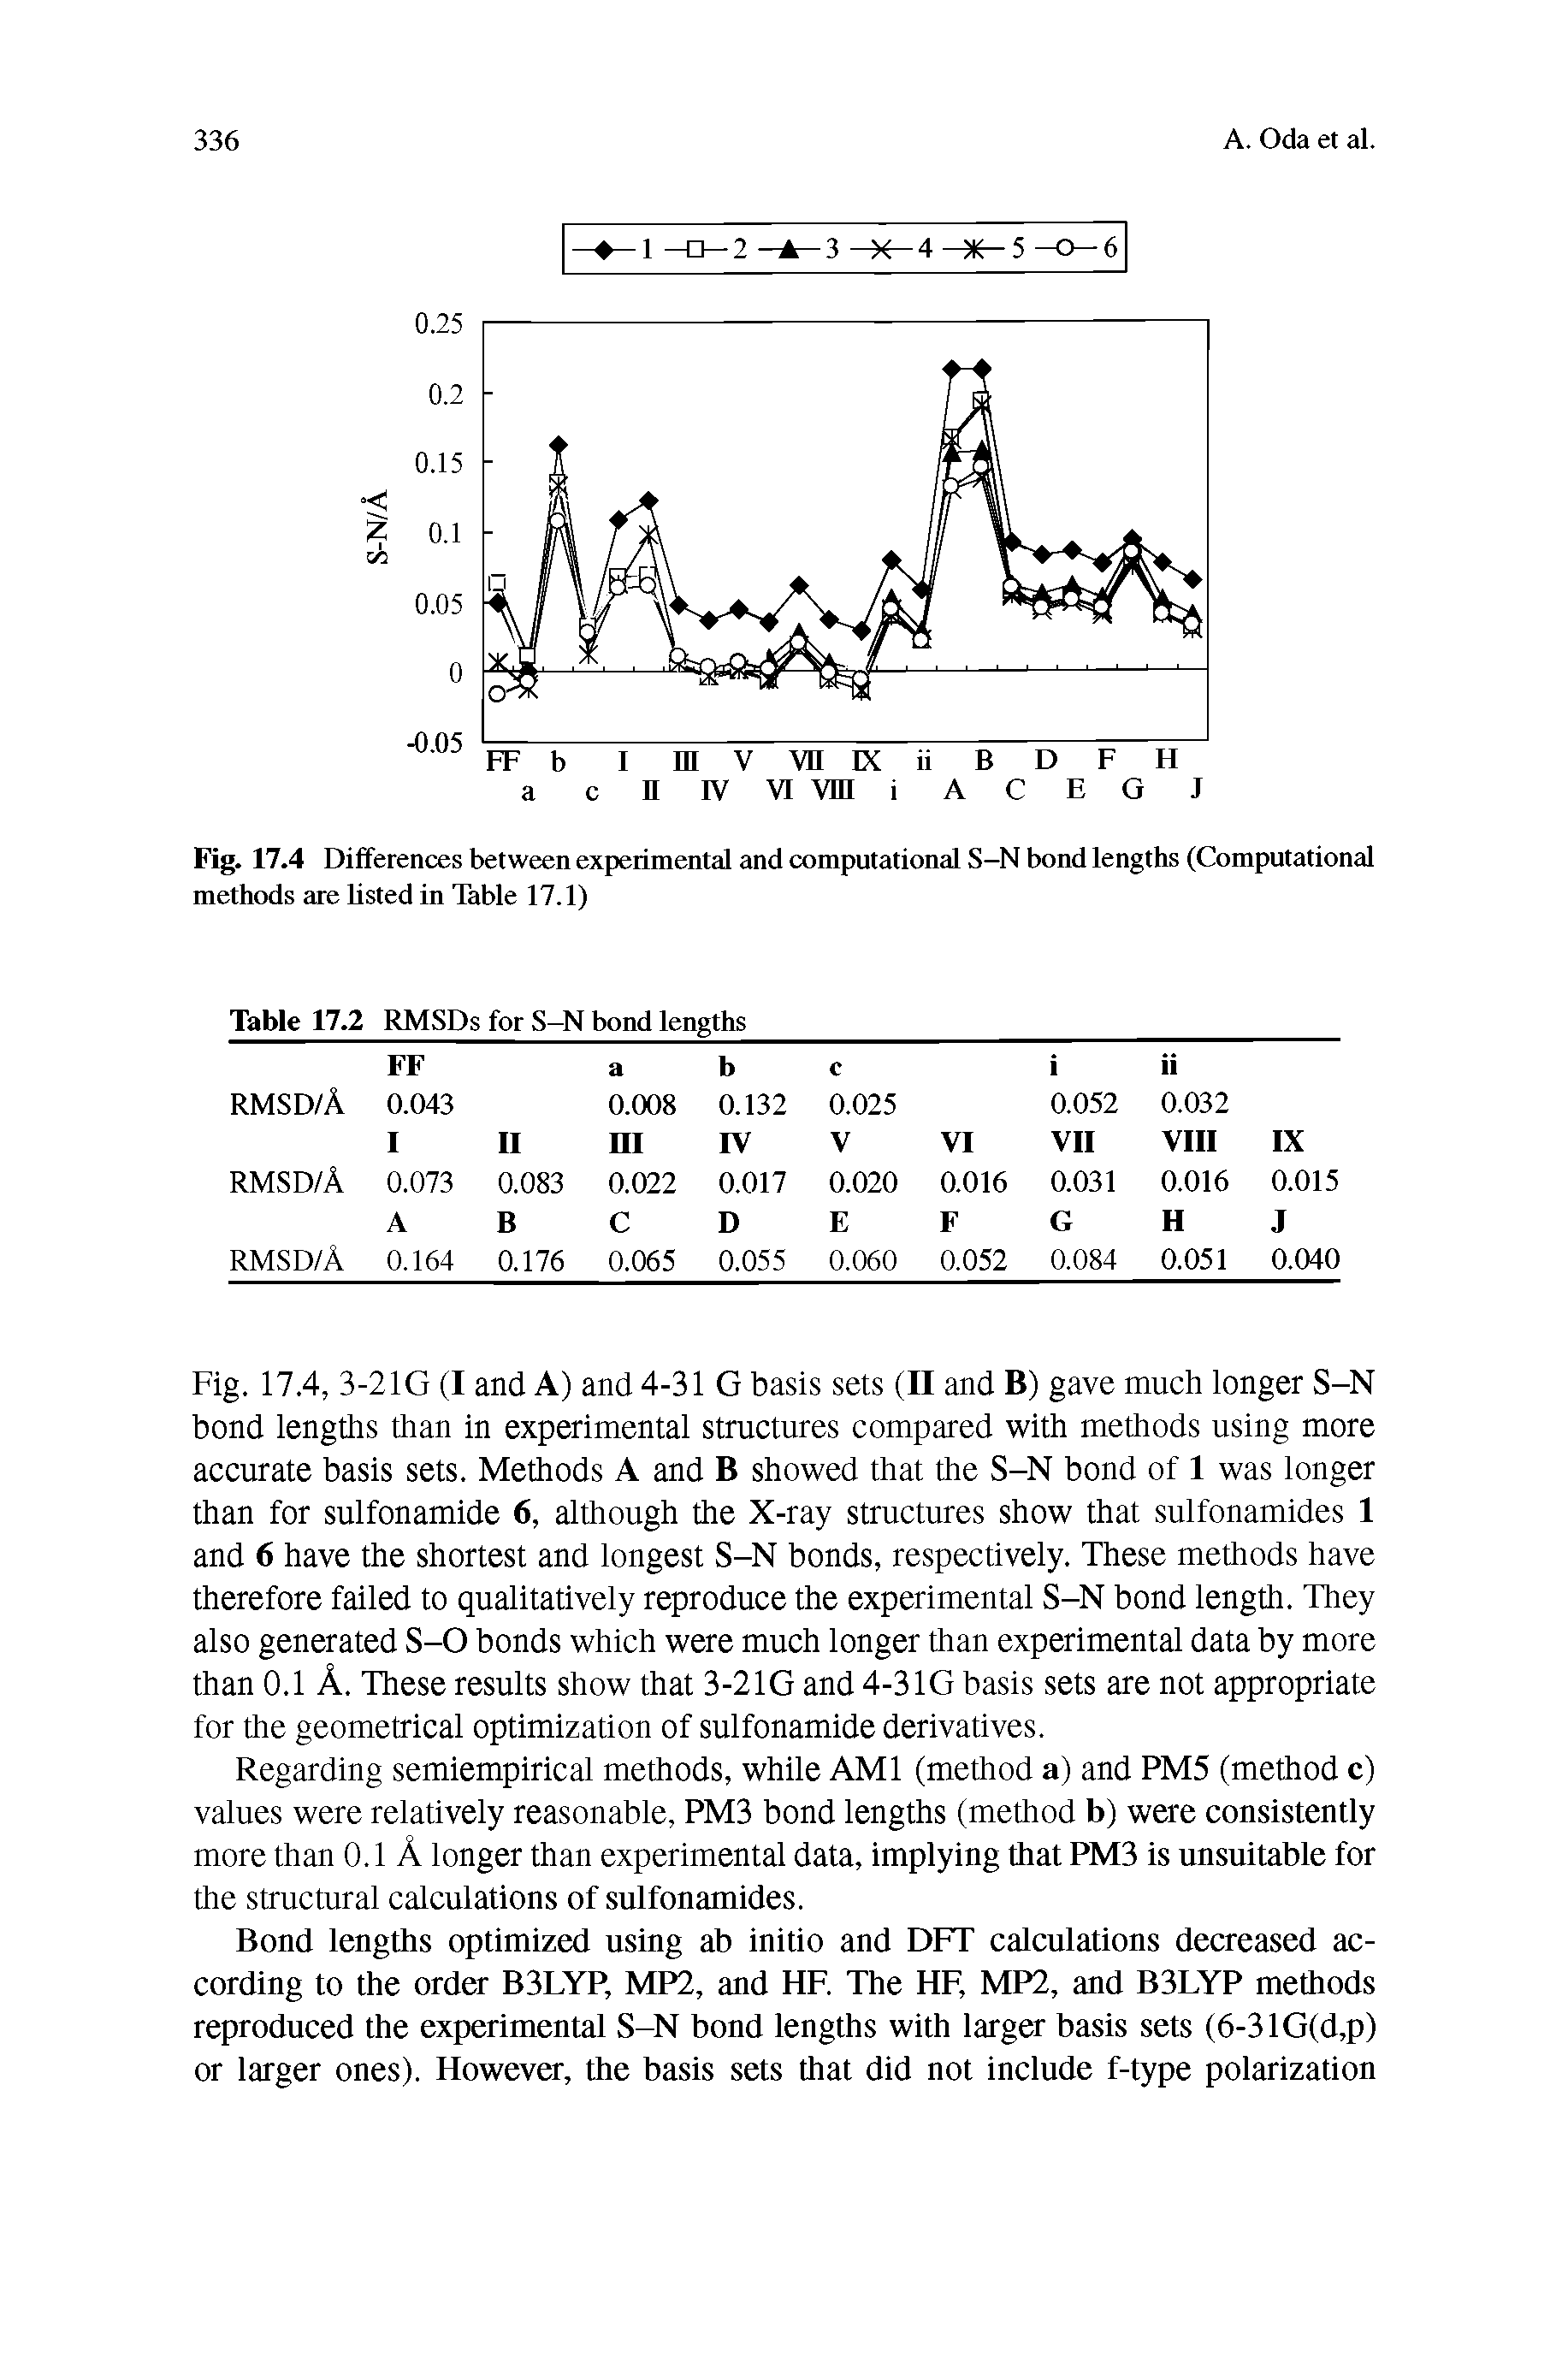 Fig. 17.4 Differences between experimental and computational S-N bond lengths (Computational methods are listed in Table 17.1)...